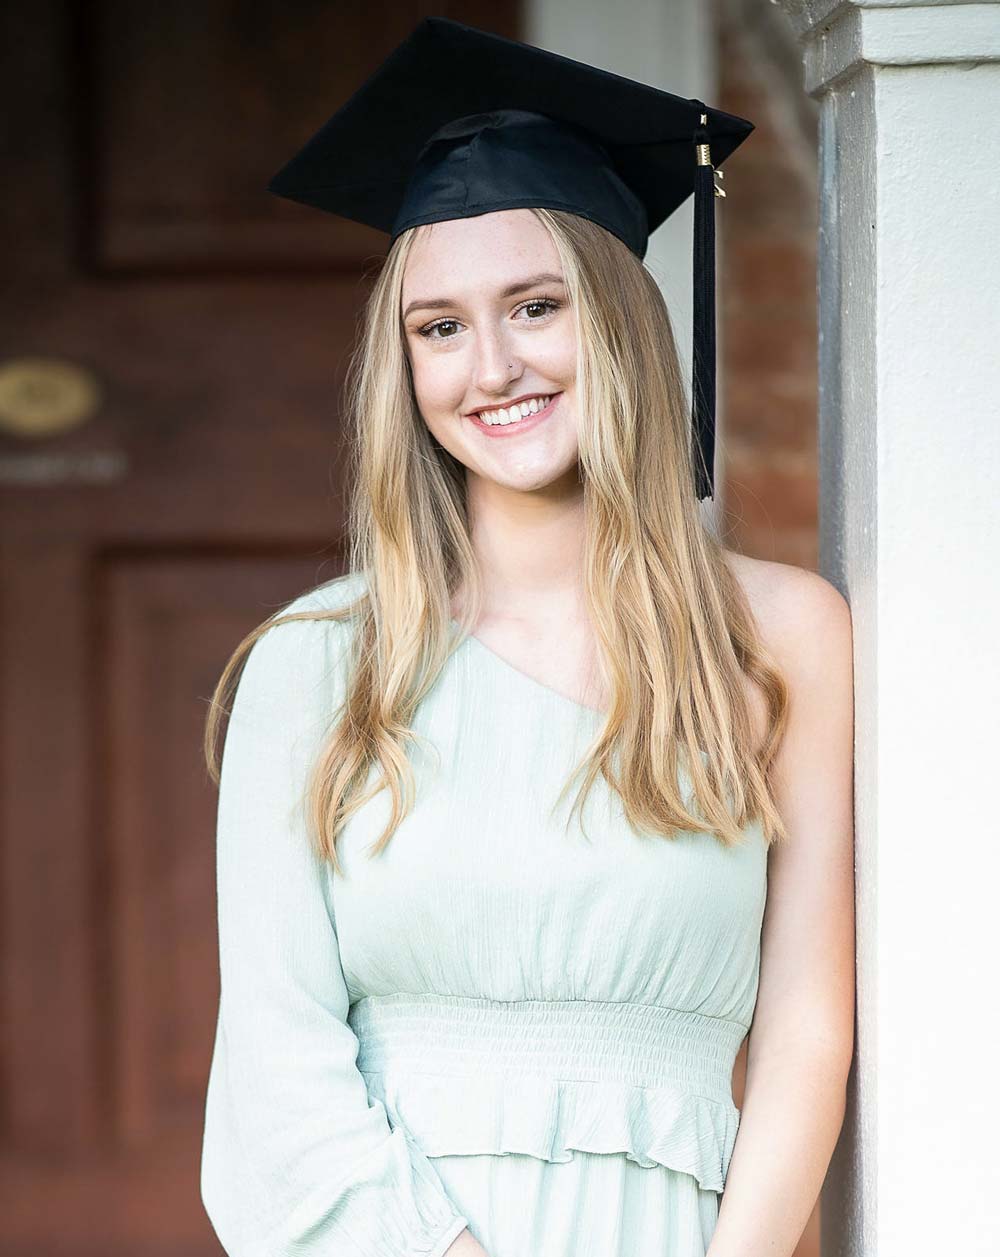 Olivia Hazelwood wears a graduation cap and smiles at the camera